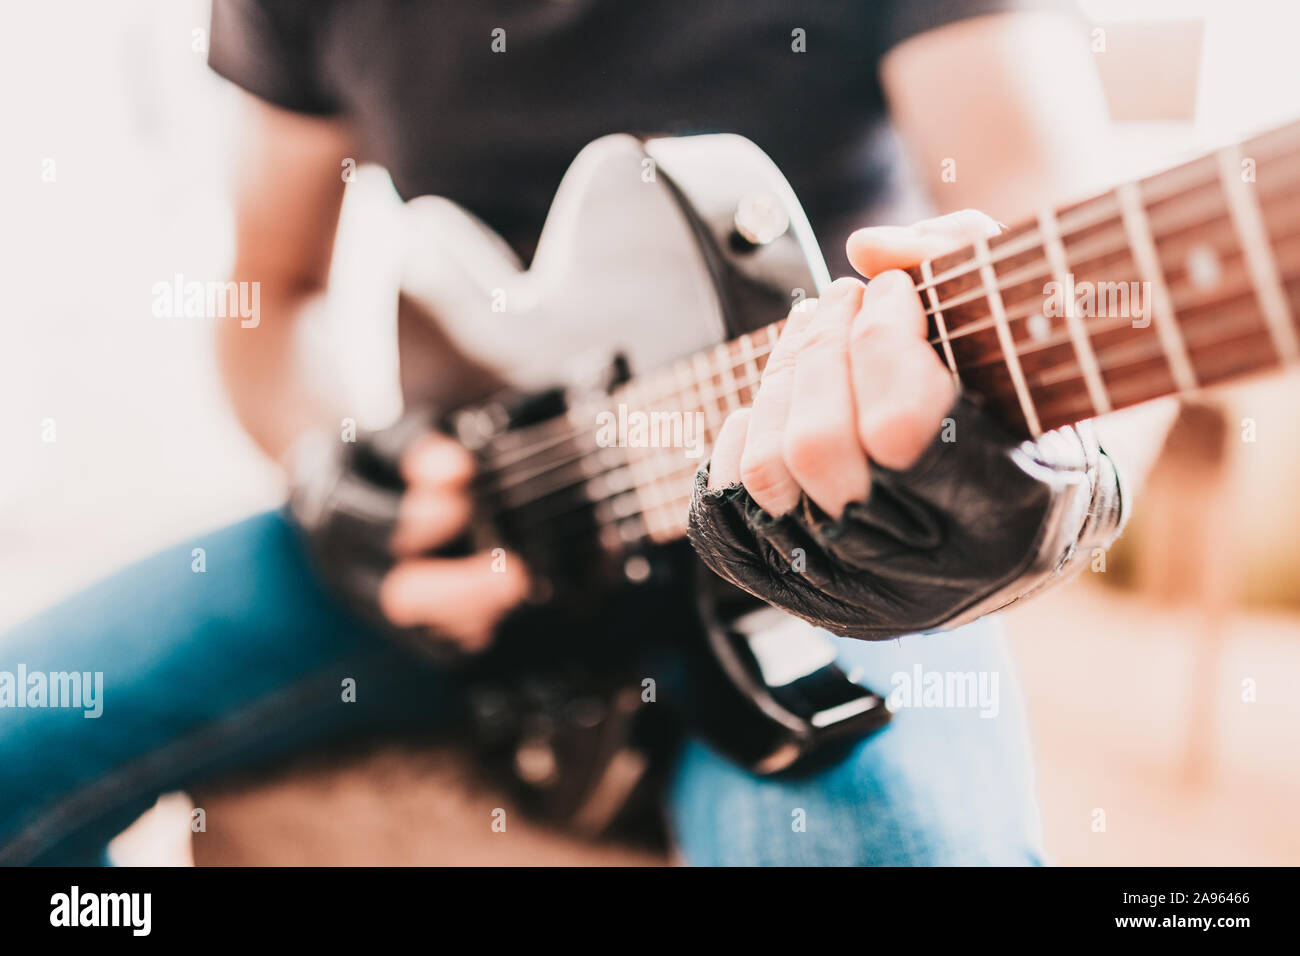 Rocker in black T-shirts and jeans playing hard rock on a black electric guitar Stock Photo